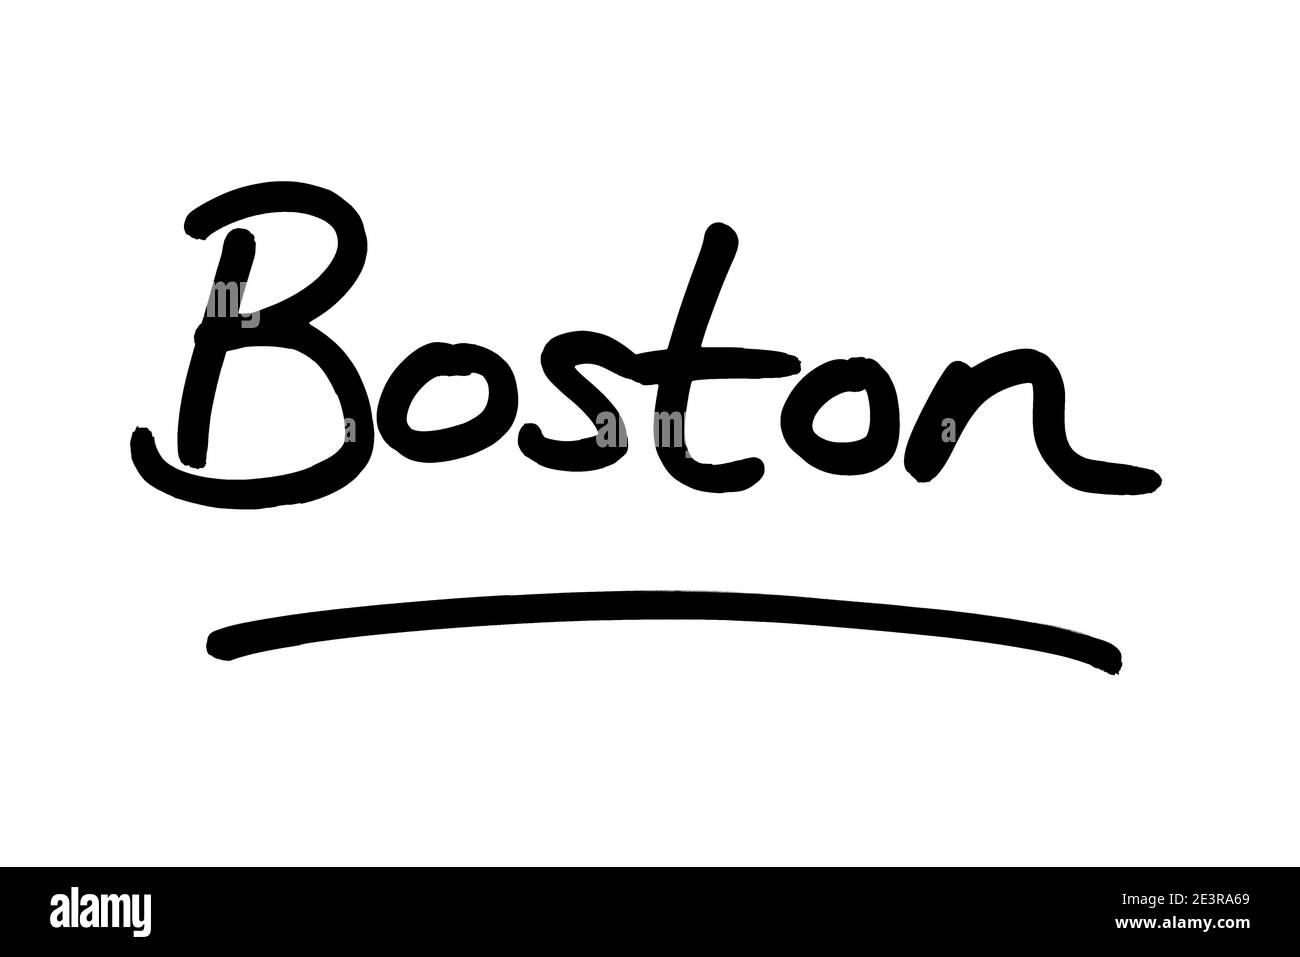 Boston - the capital city of the state of Massachusetts, in the United States of America. Stock Photo